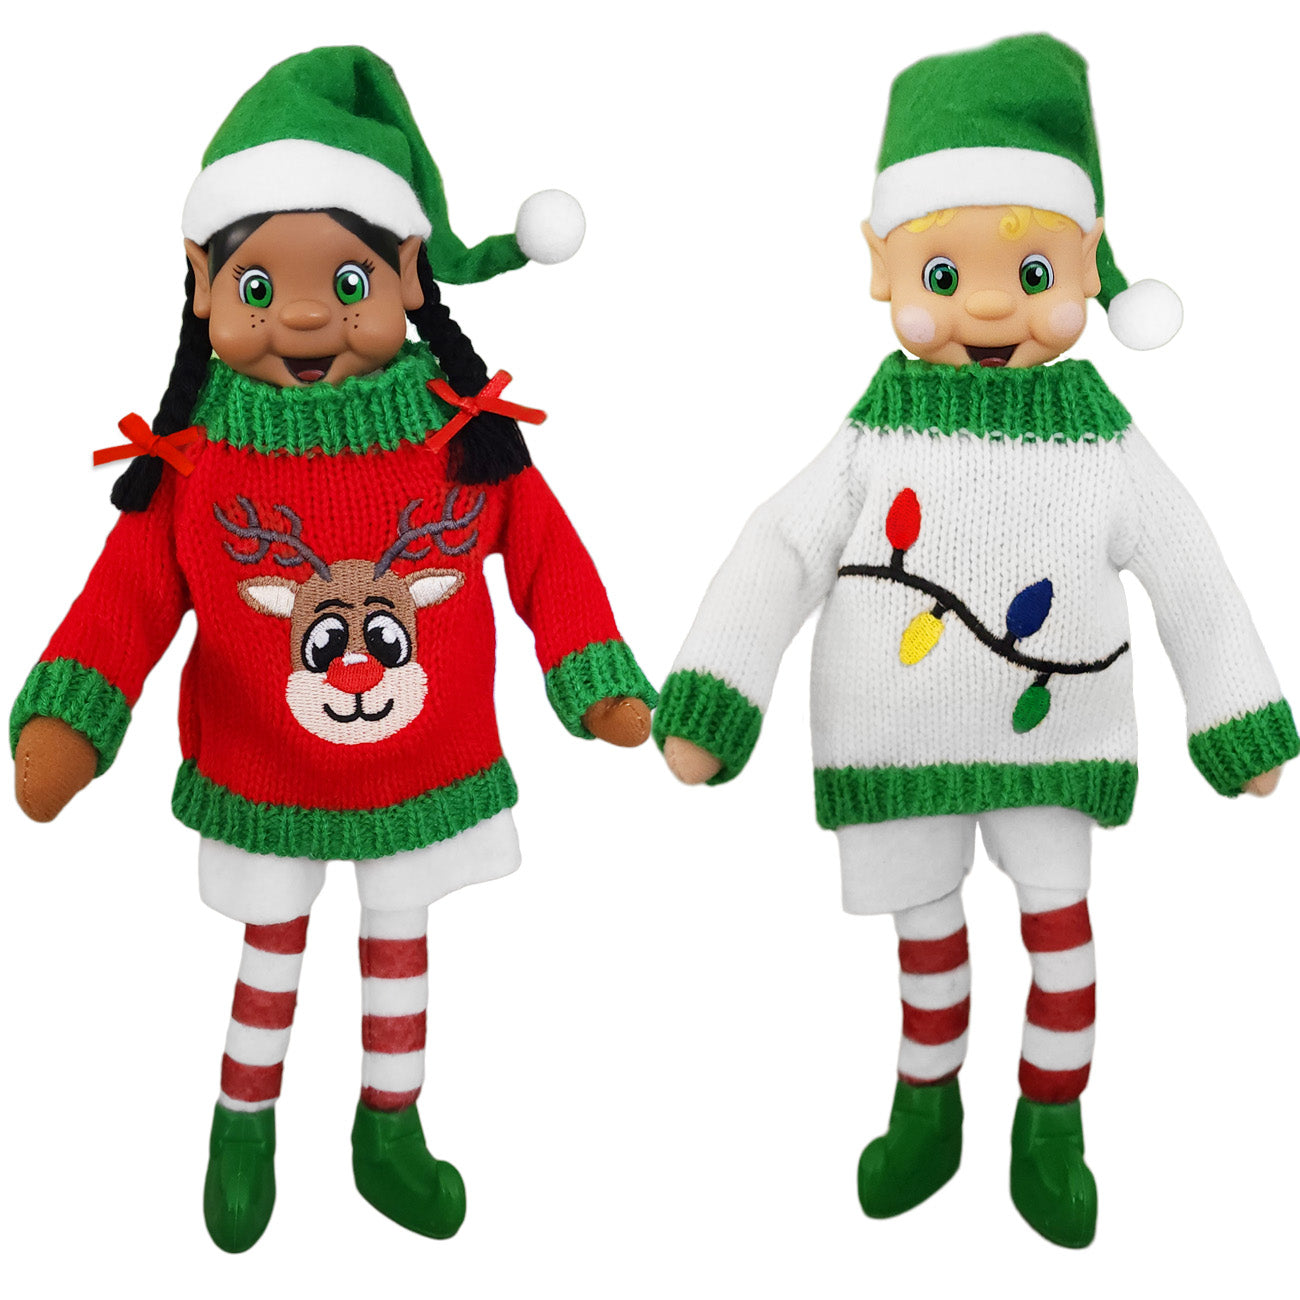 Elf sized ugly sweaters. Red reindeer warn by my elf friends, Lights sweater worn by my elf friends boy